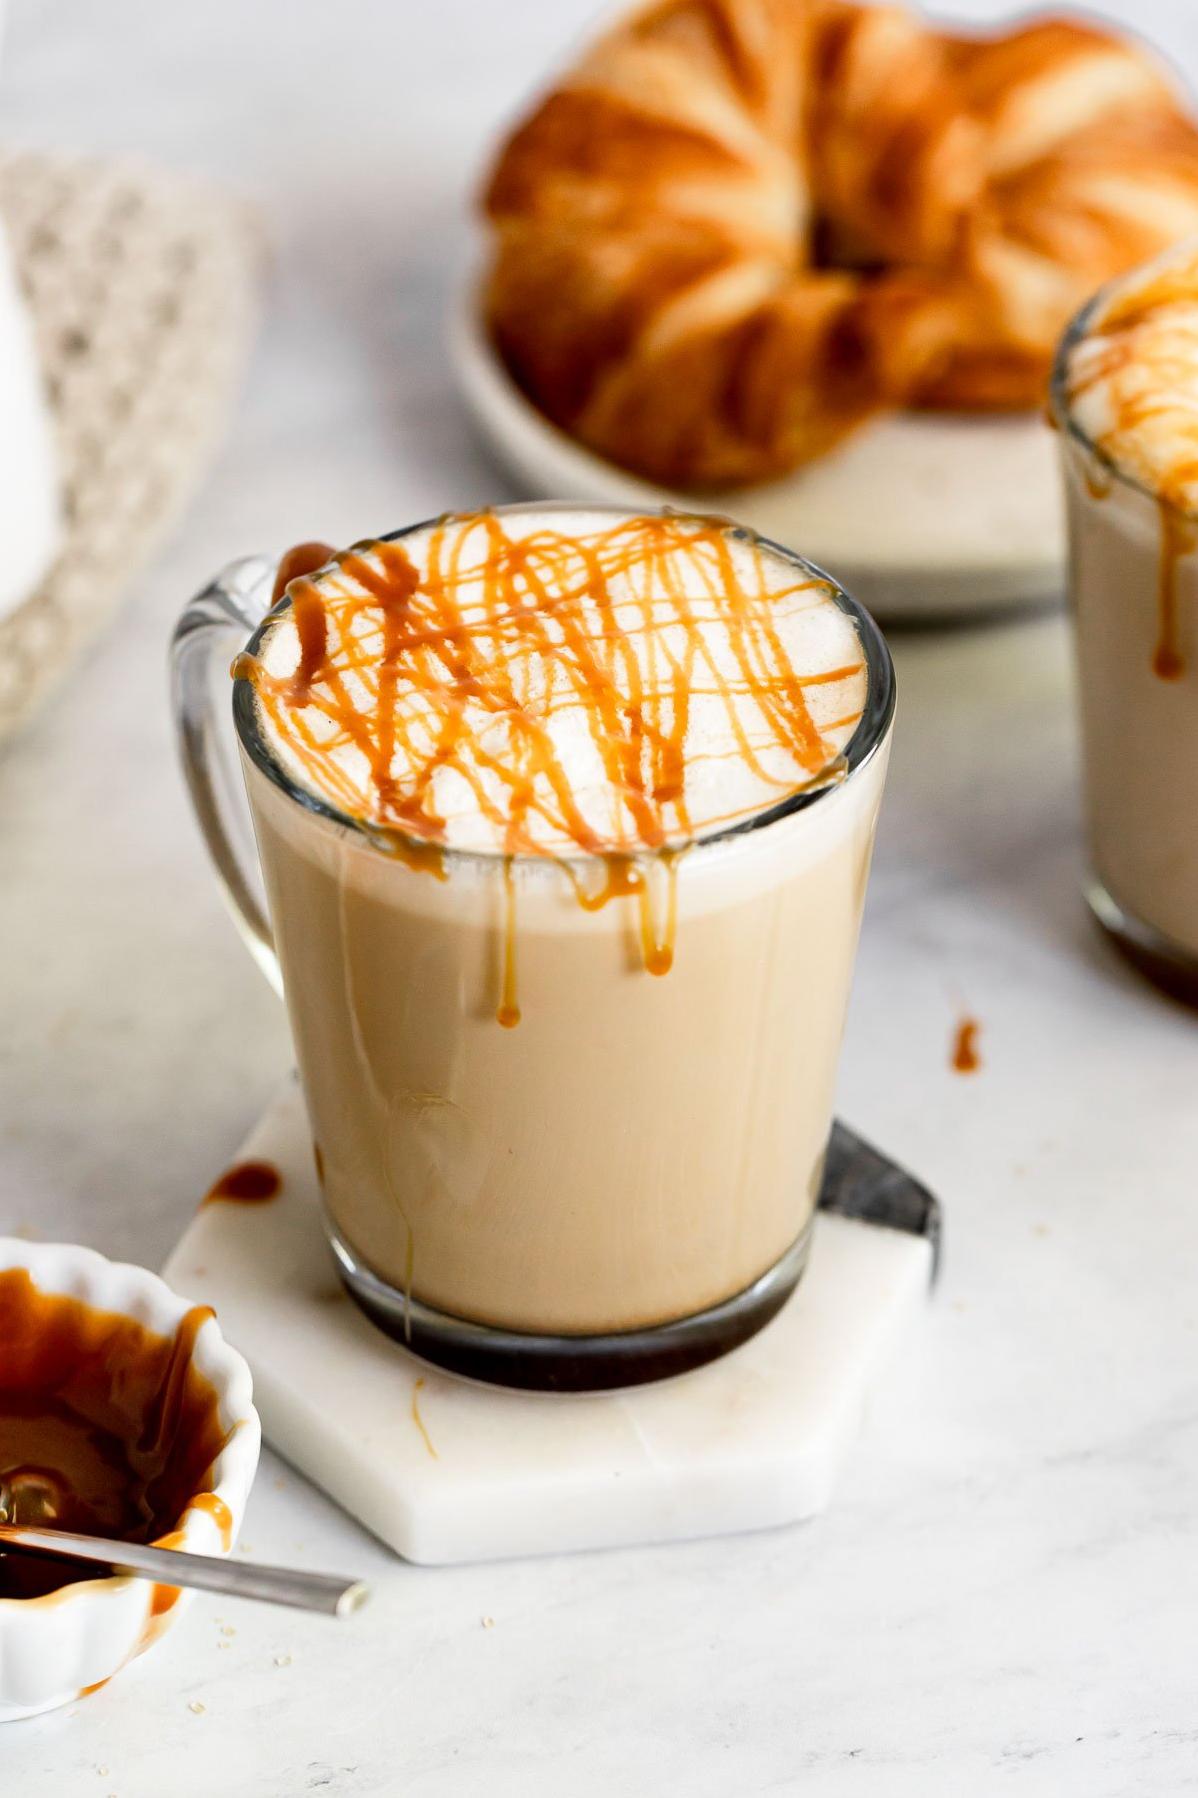  You can't buy happiness, but you can order a cup of caramel coffee, and that's pretty close.